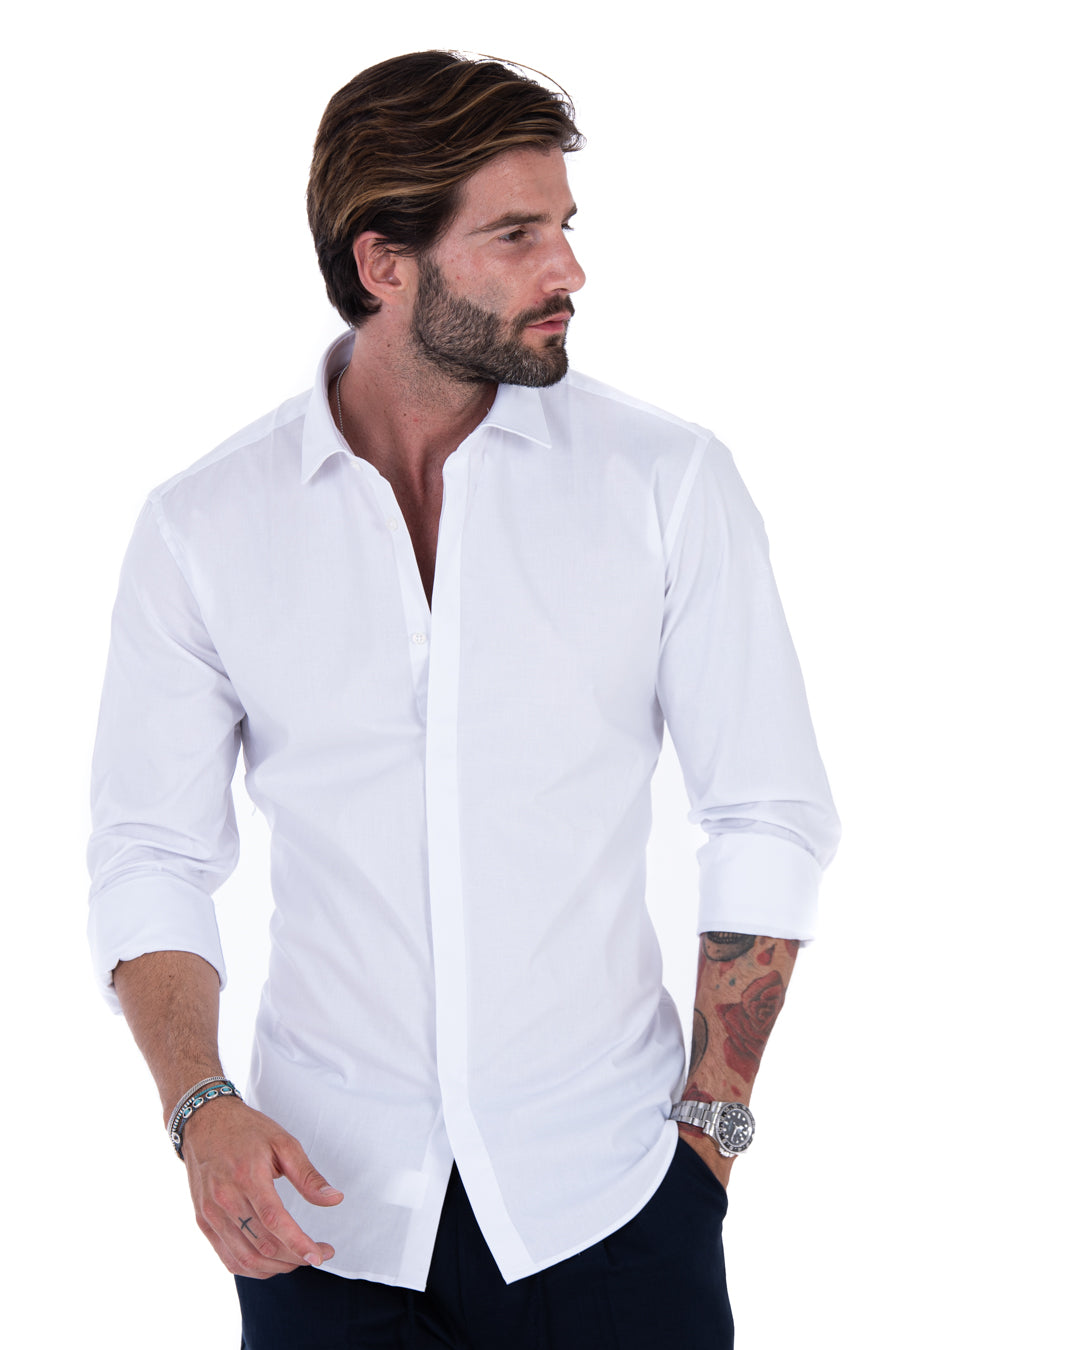 Shirt - classic white basic in cotton